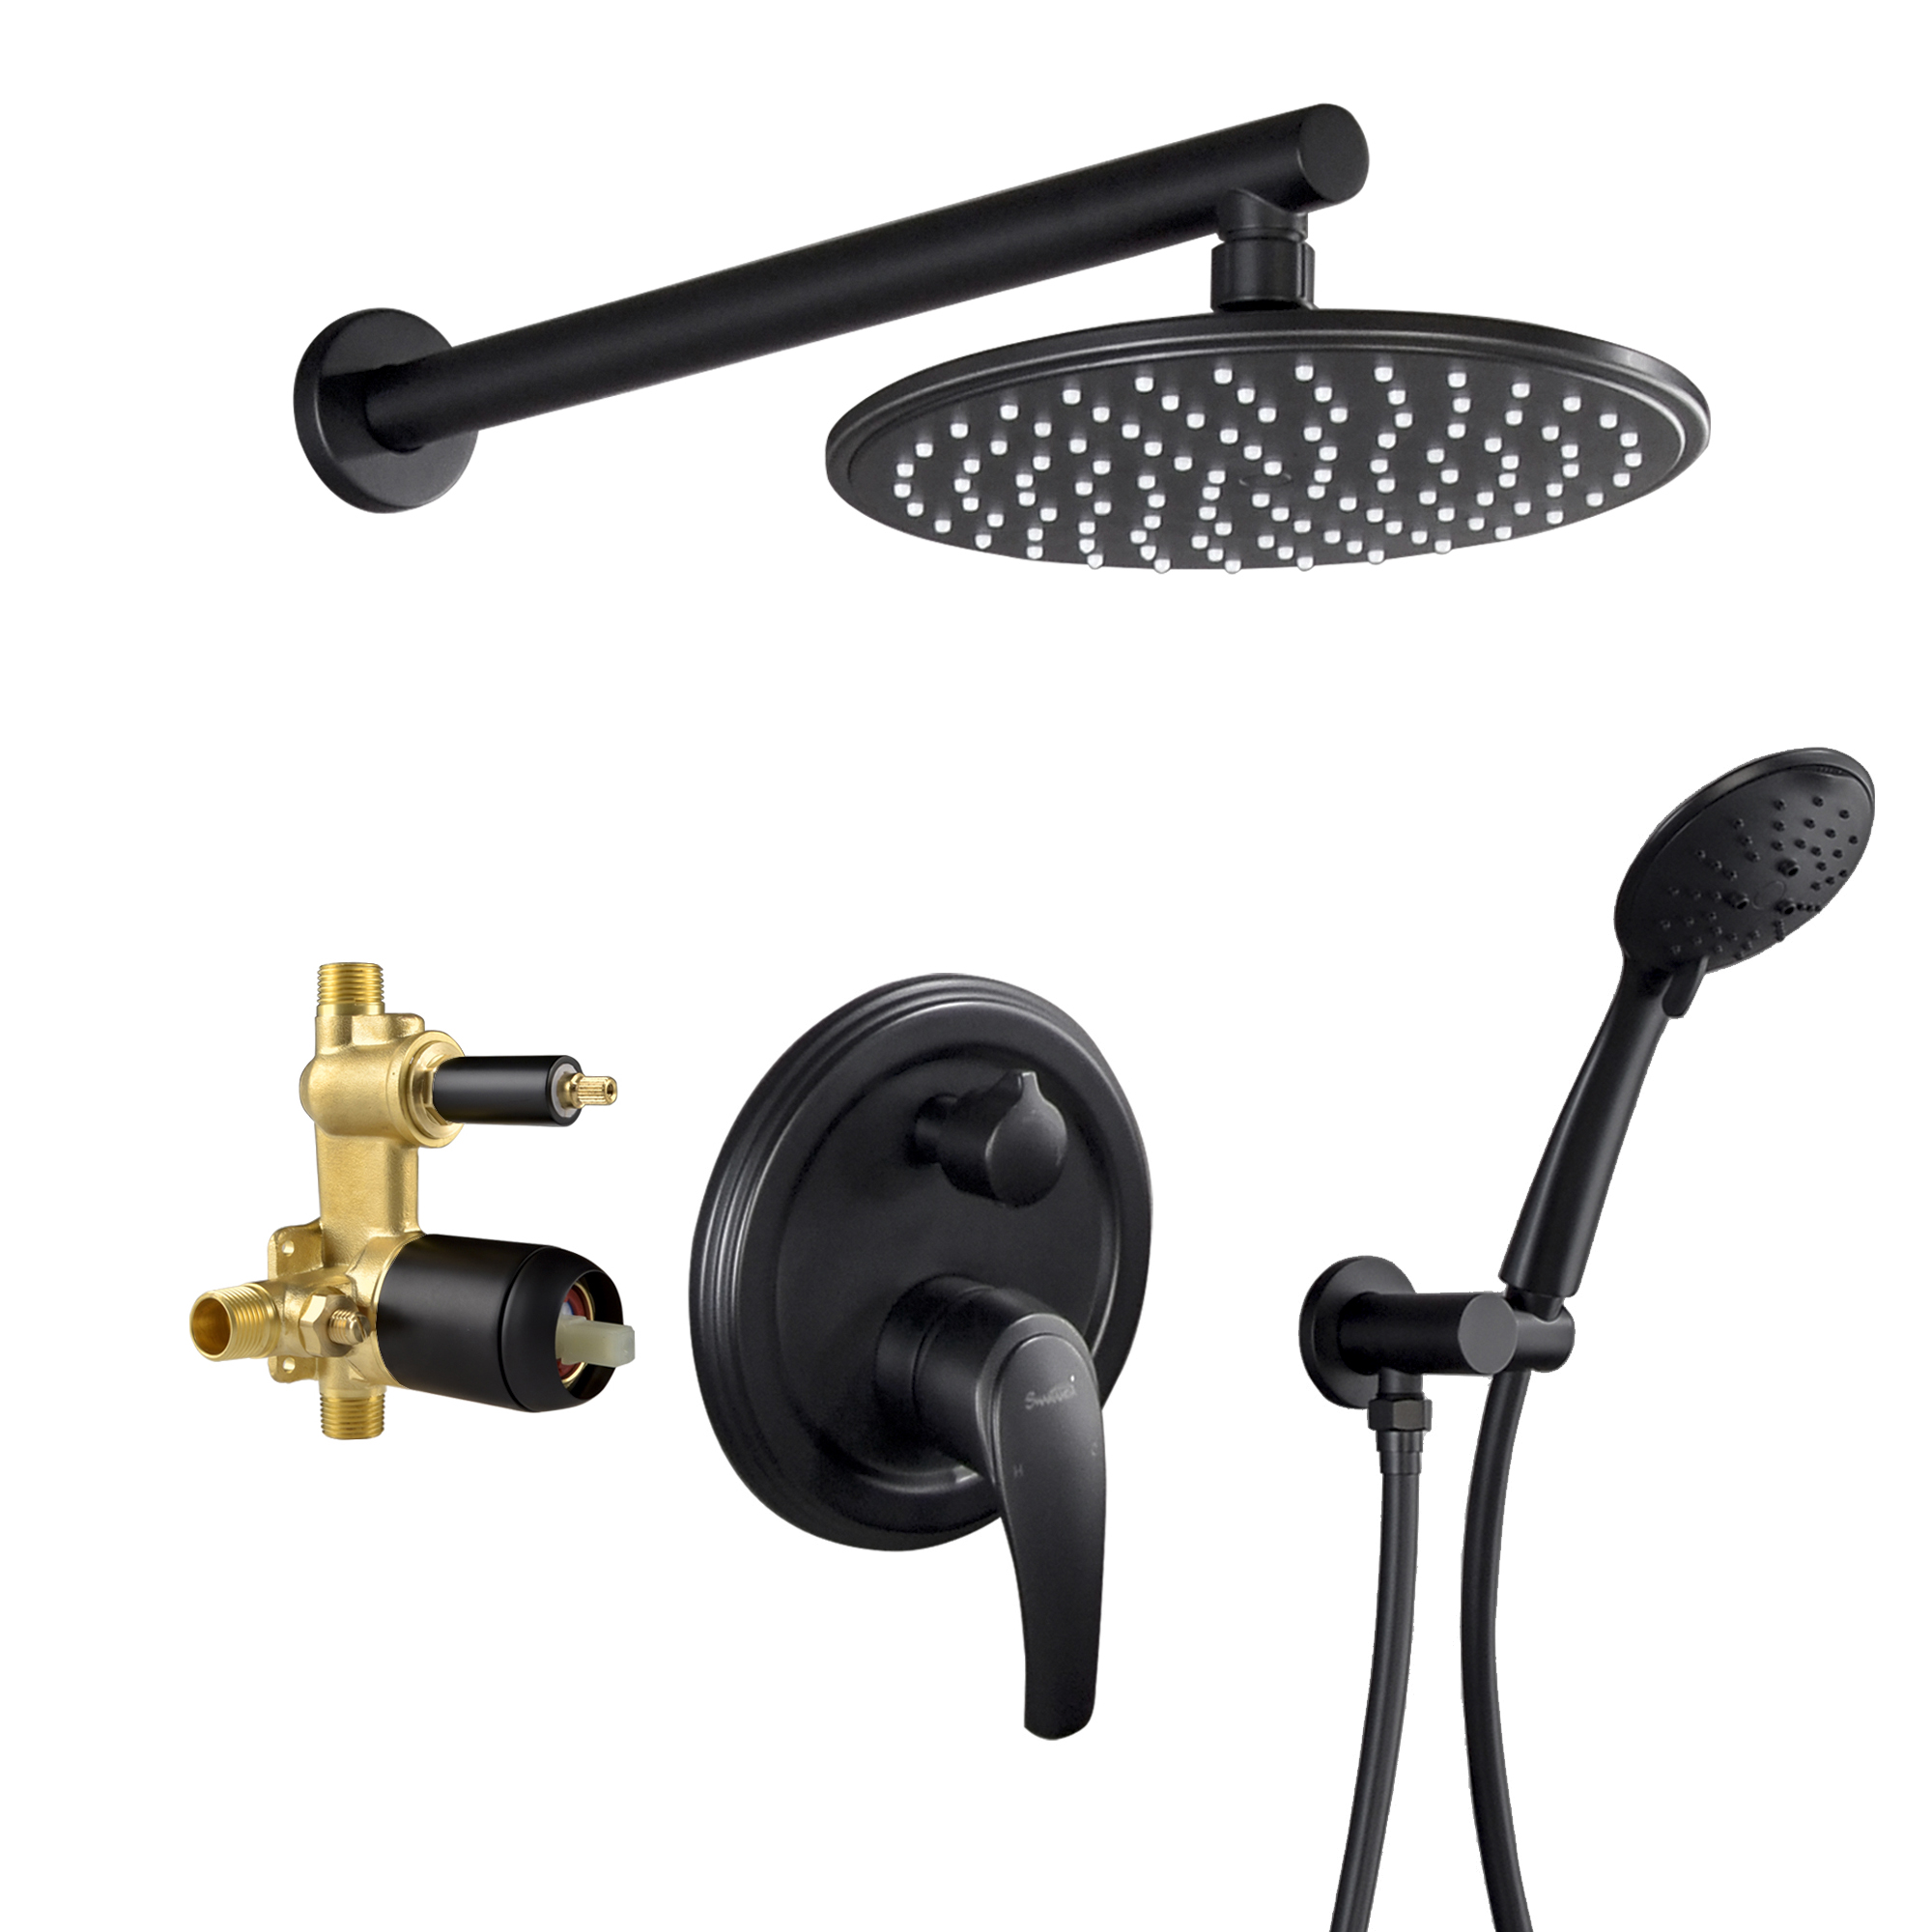 Casainc 3.2 GPM Wall Mounted 10-In Shower System with 5-Spray Patterns (Matte Black),single function handles